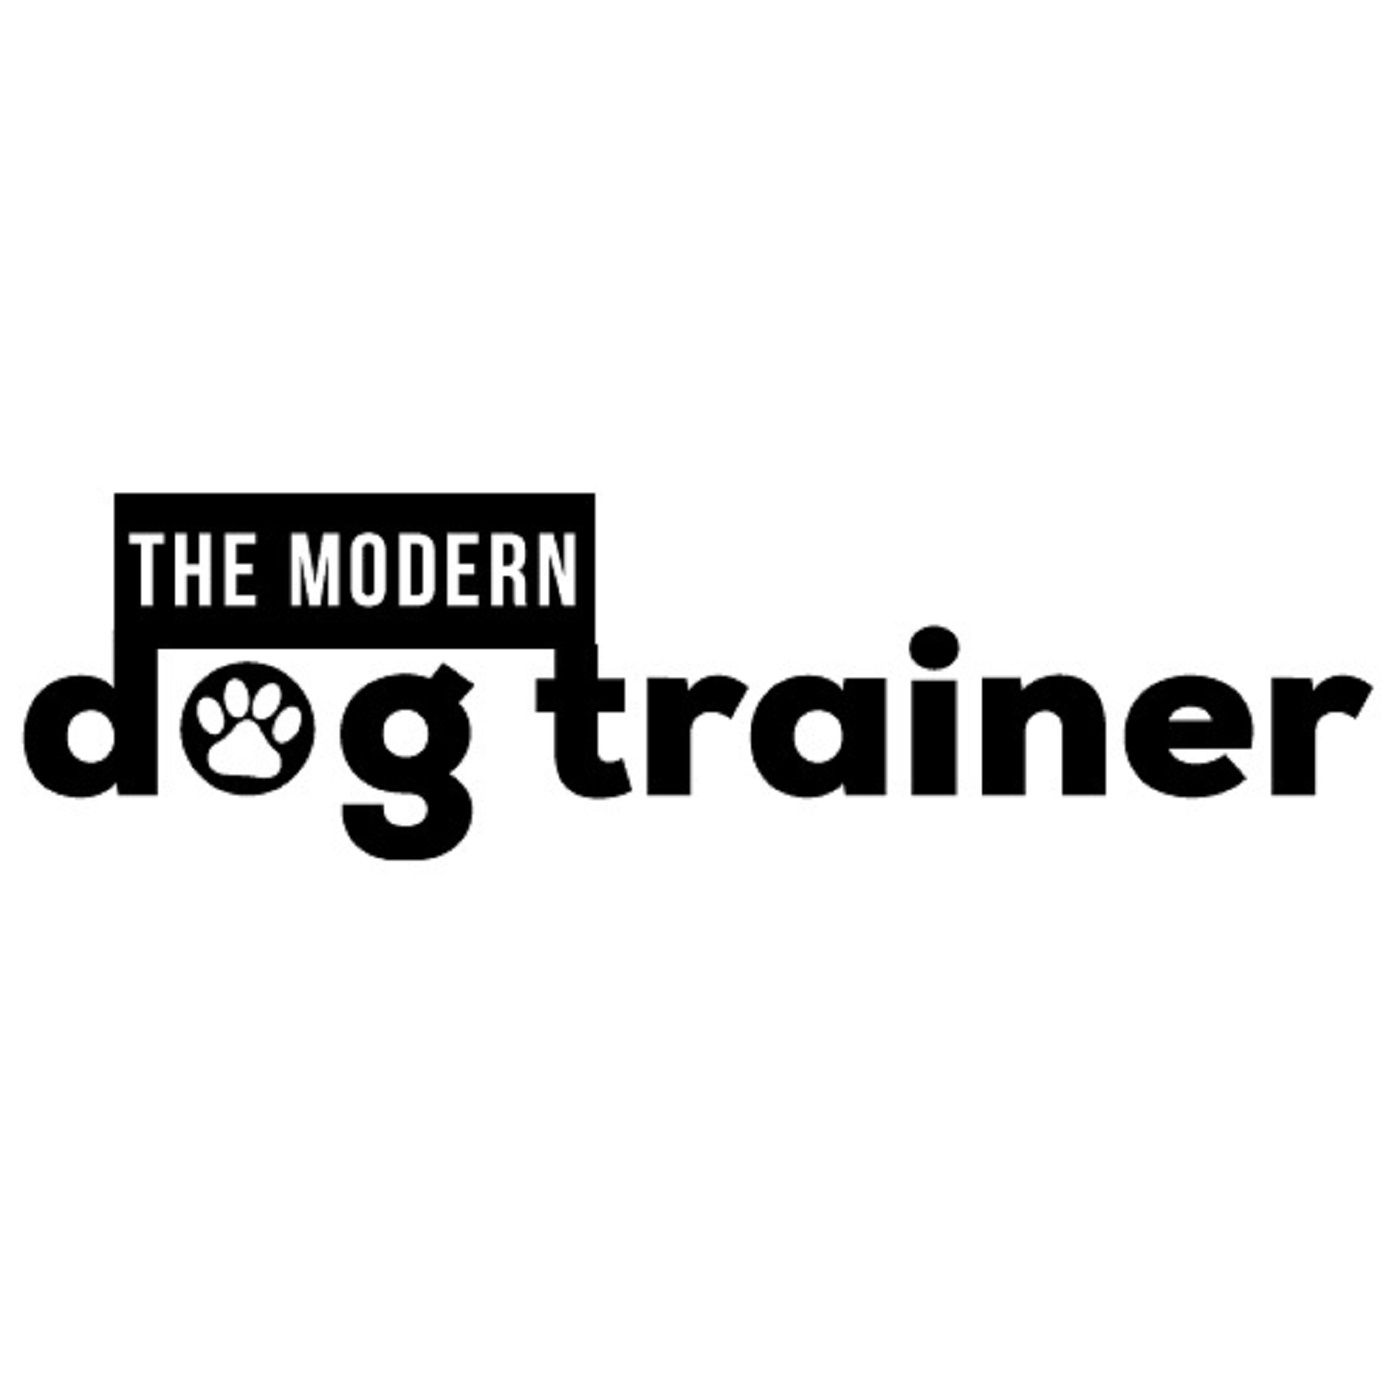 Ep 17 - Jeffrey McClure on New Dog Training Business Challenges in Rural Areas